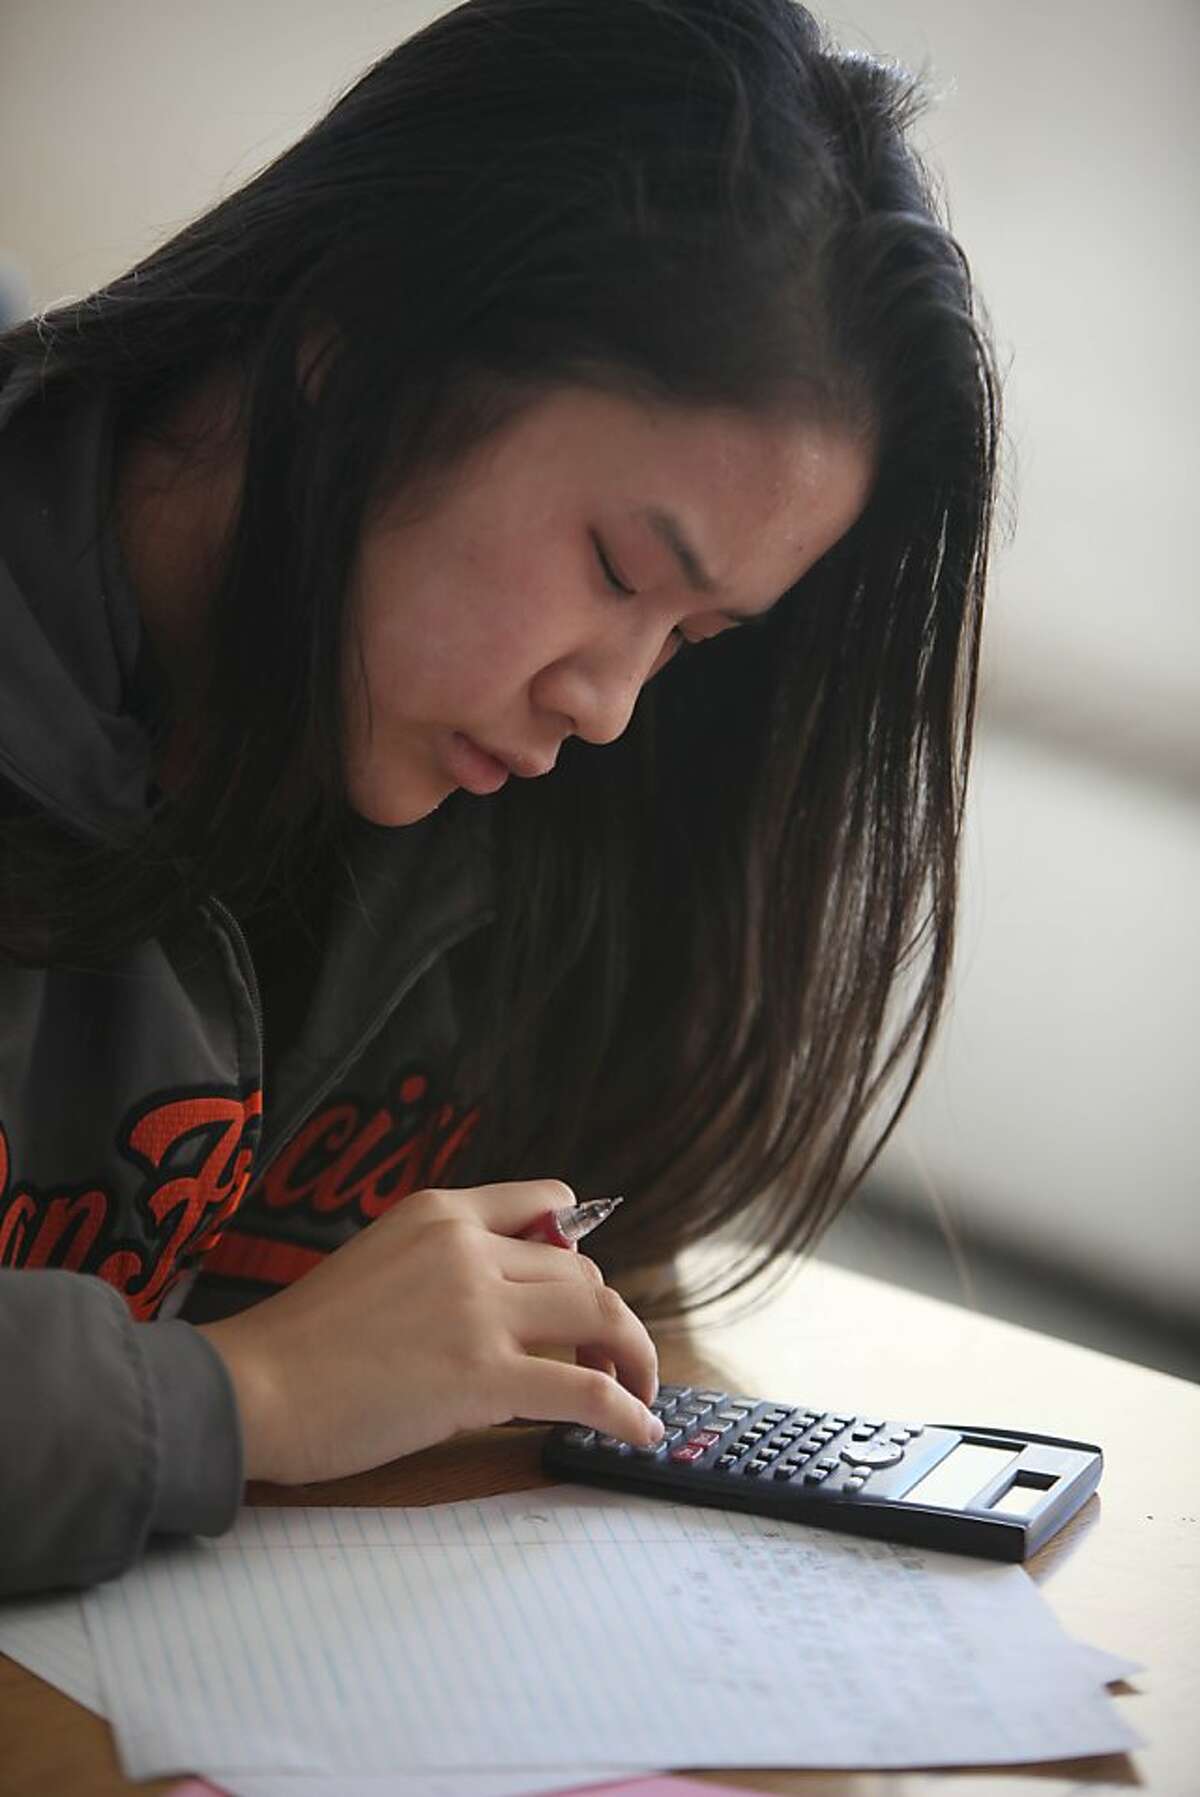 Chelsea Nguyen, 15, works on classwork during an Algebra II class at Phillip and Sala Burton Academic High School on Wednesday, October 2, 2013 in San Francisco, Calif.